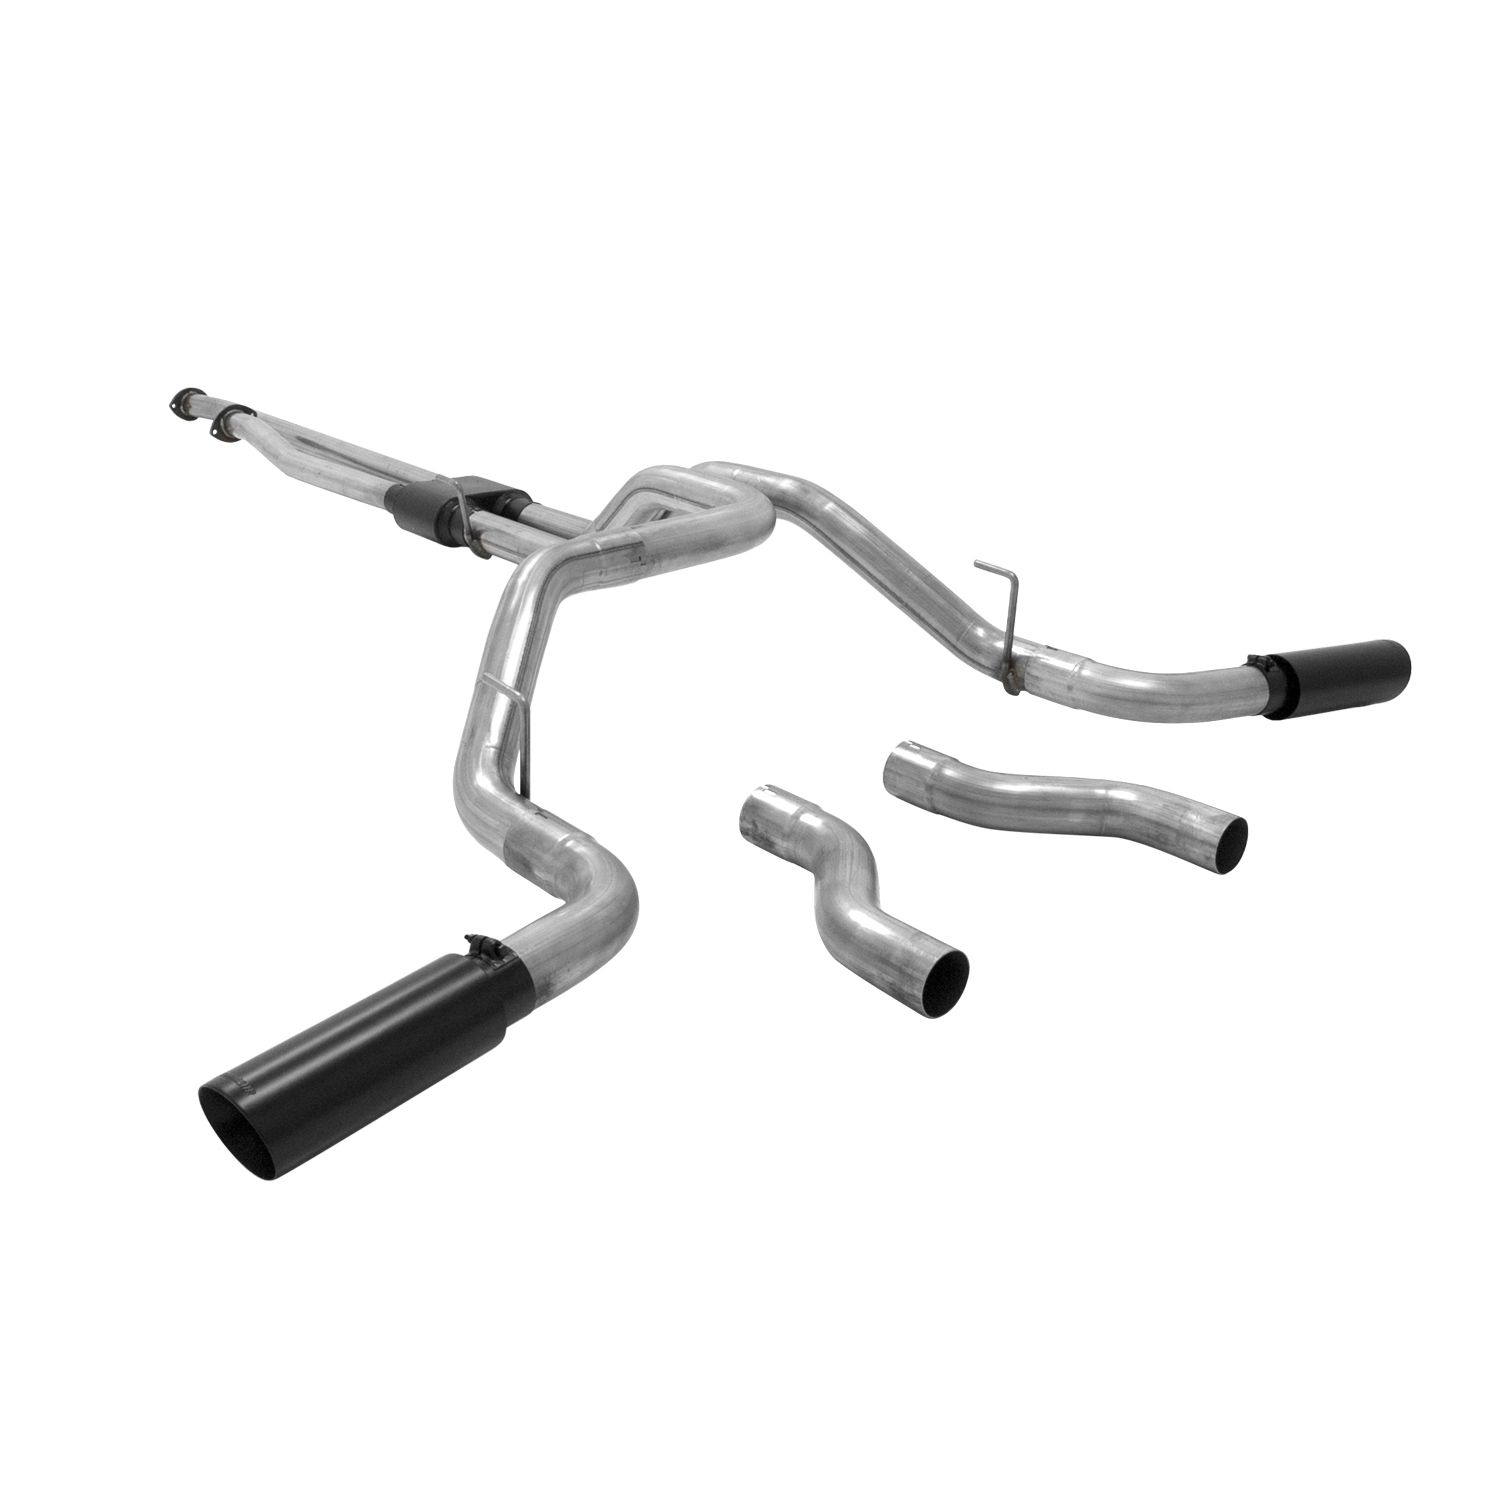 2017 Toyota Tundra TRD Pro 5.7L Flowmaster Outlaw CatBack Exhaust 817692